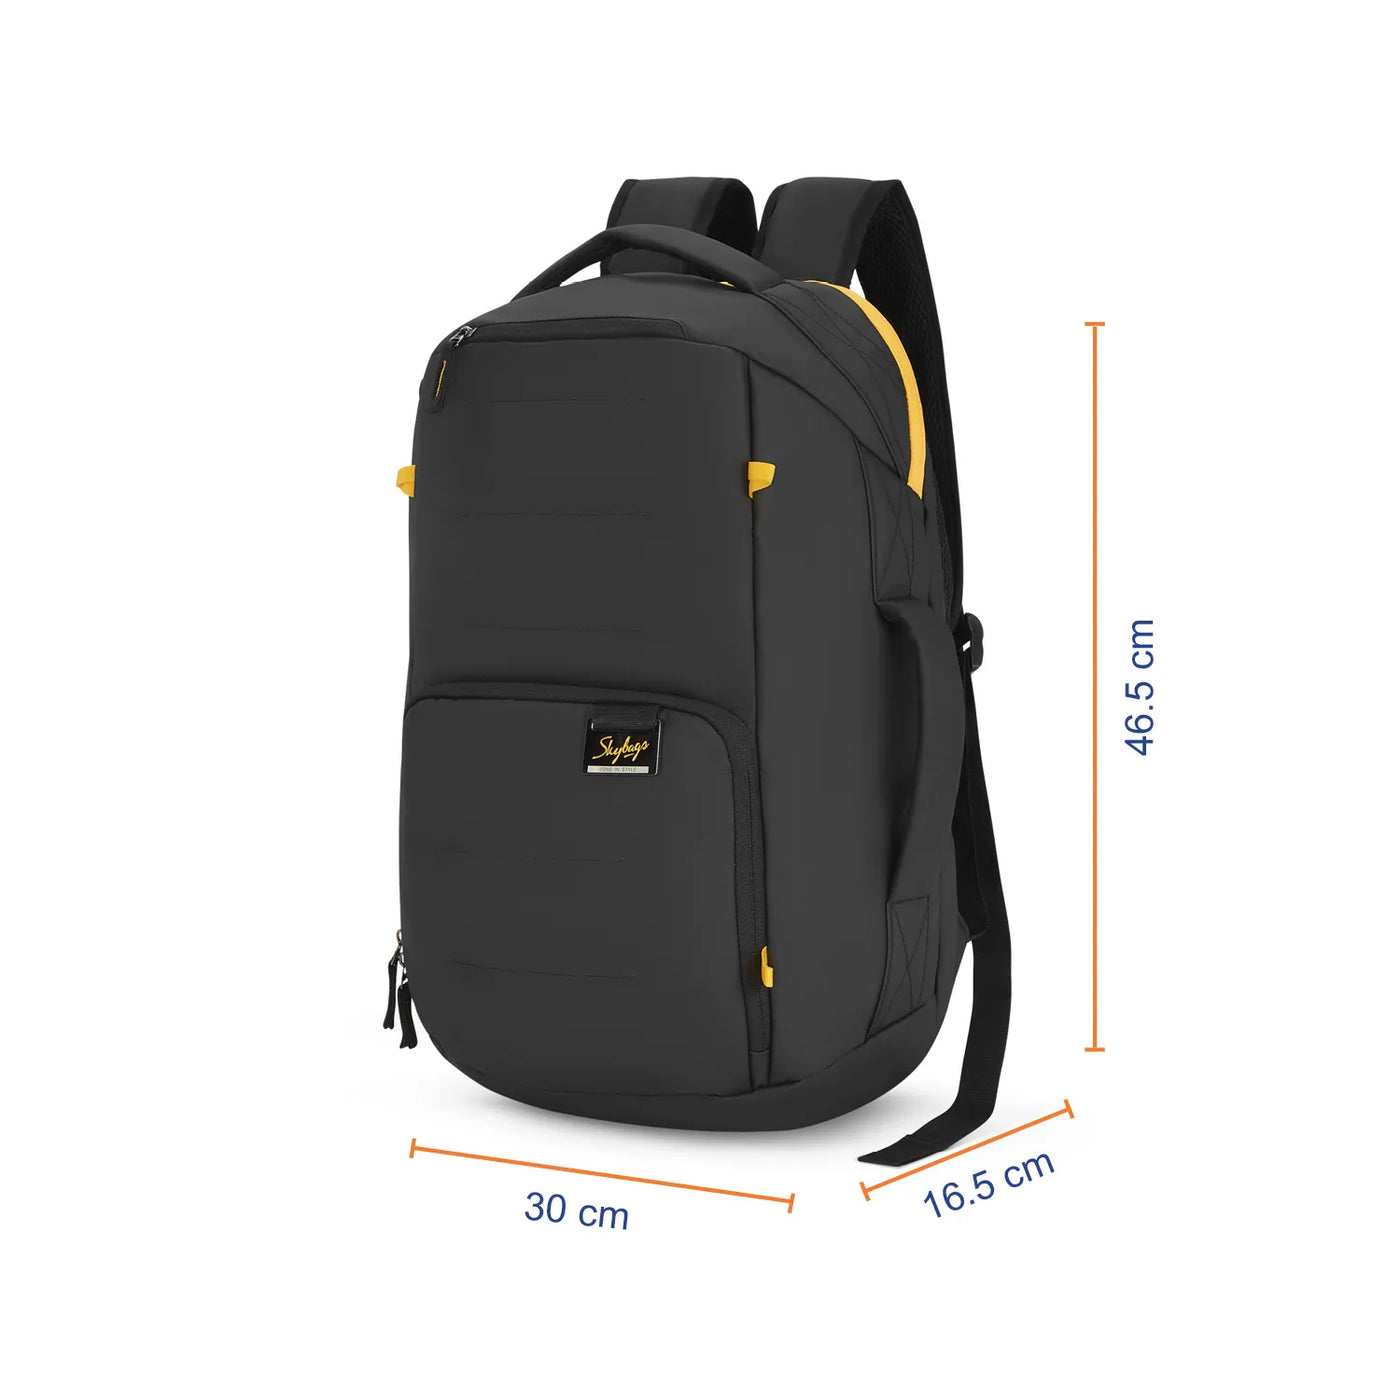 Skybags Backpack(Black) in Delhi at best price by Luggage Point - Justdial